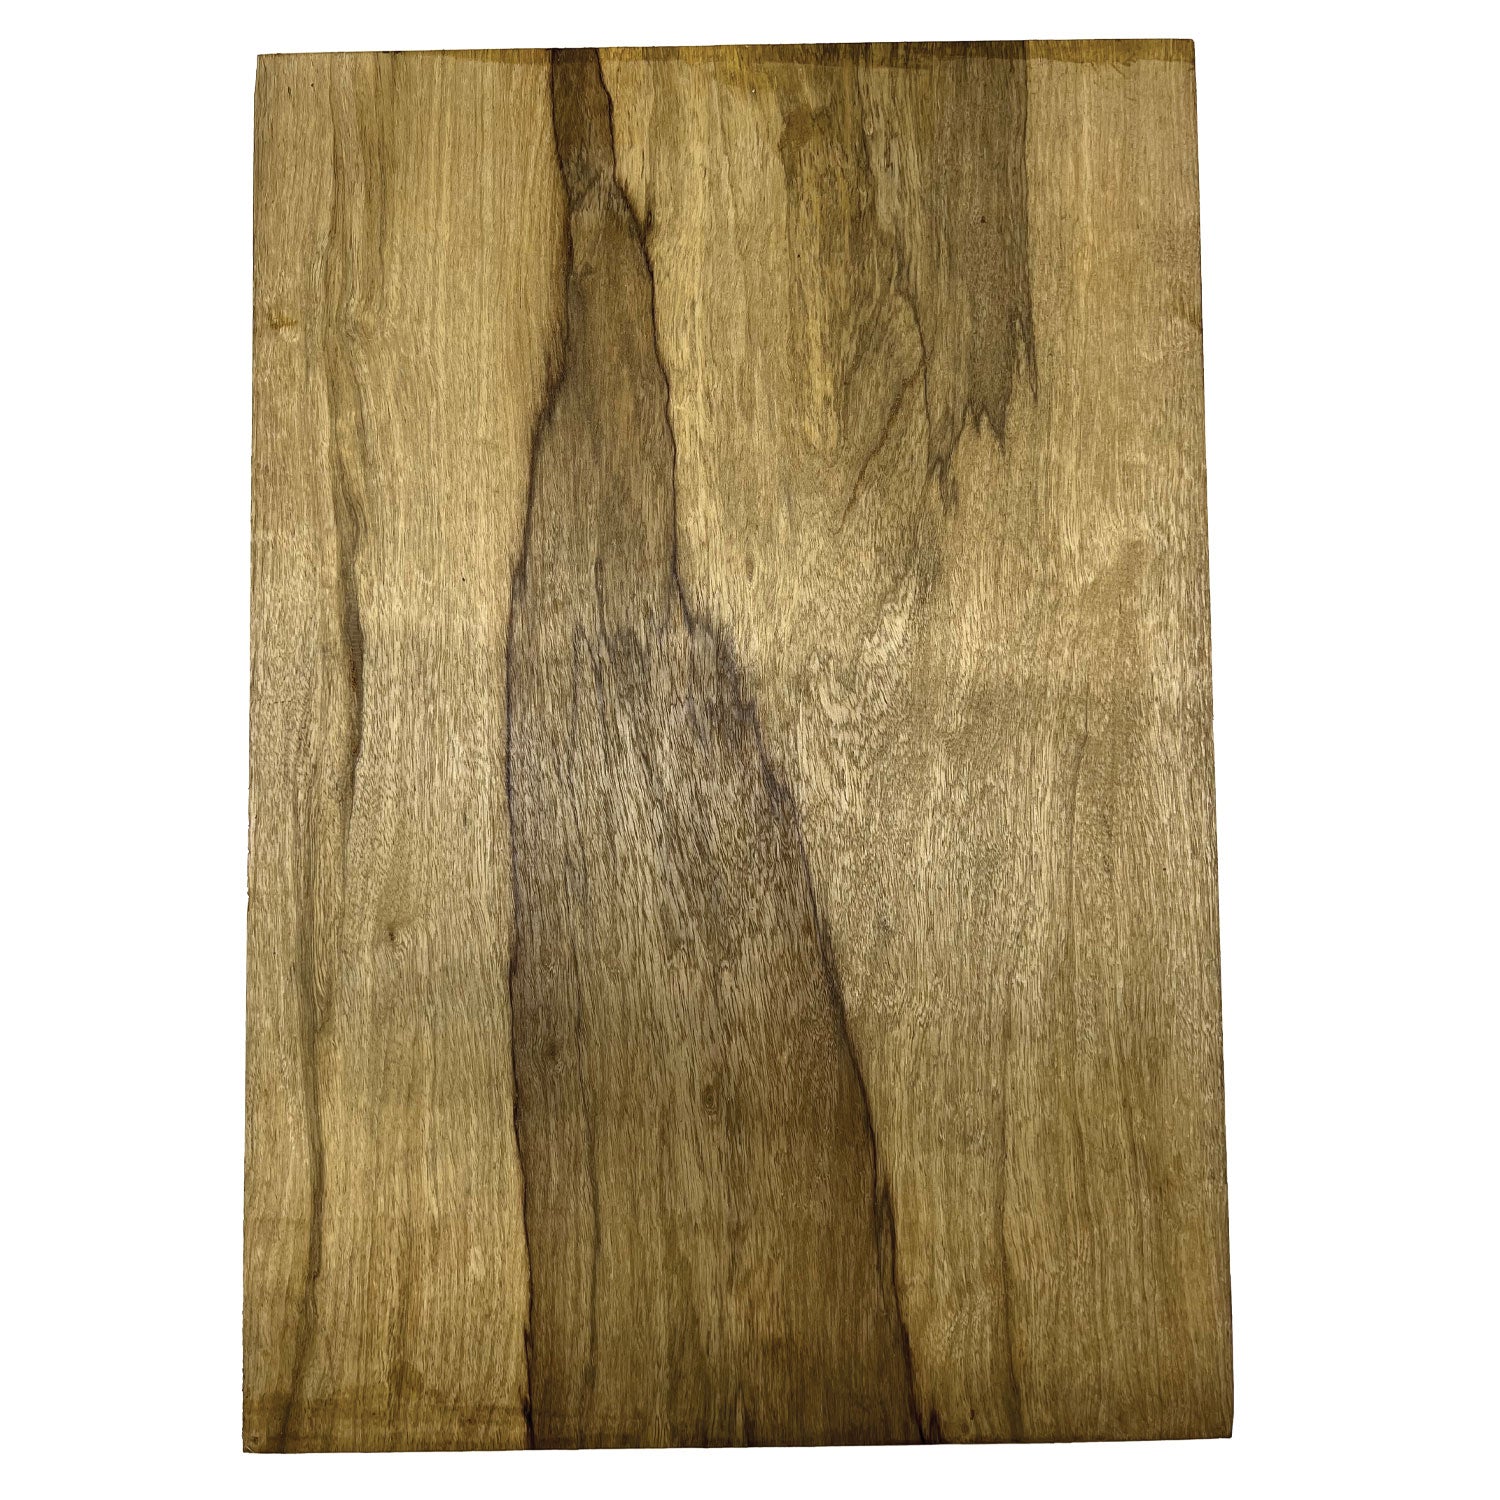 Black Limba Electric/Bass Guitar Body Blanks 21&quot; x 15&quot; x 2&quot; - Exotic Wood Zone - Buy online Across USA 